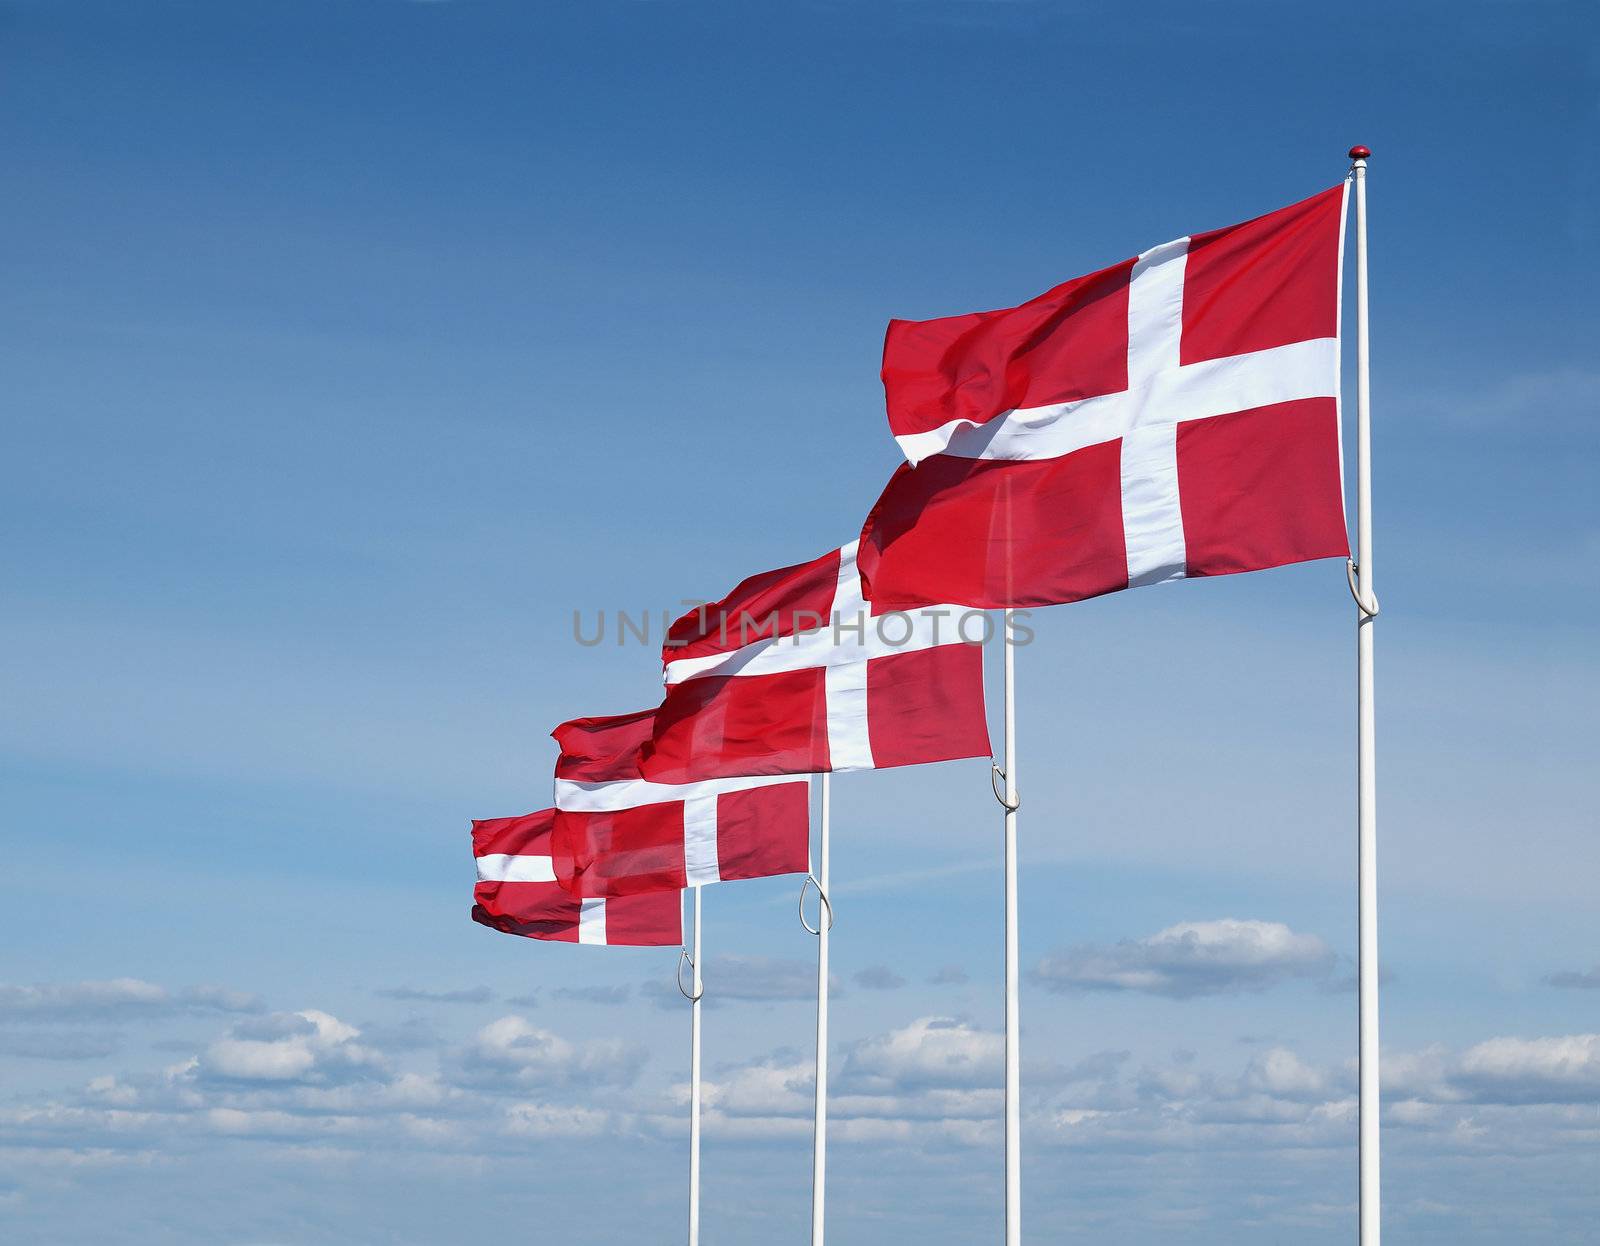 four flapping danish flags by Ric510